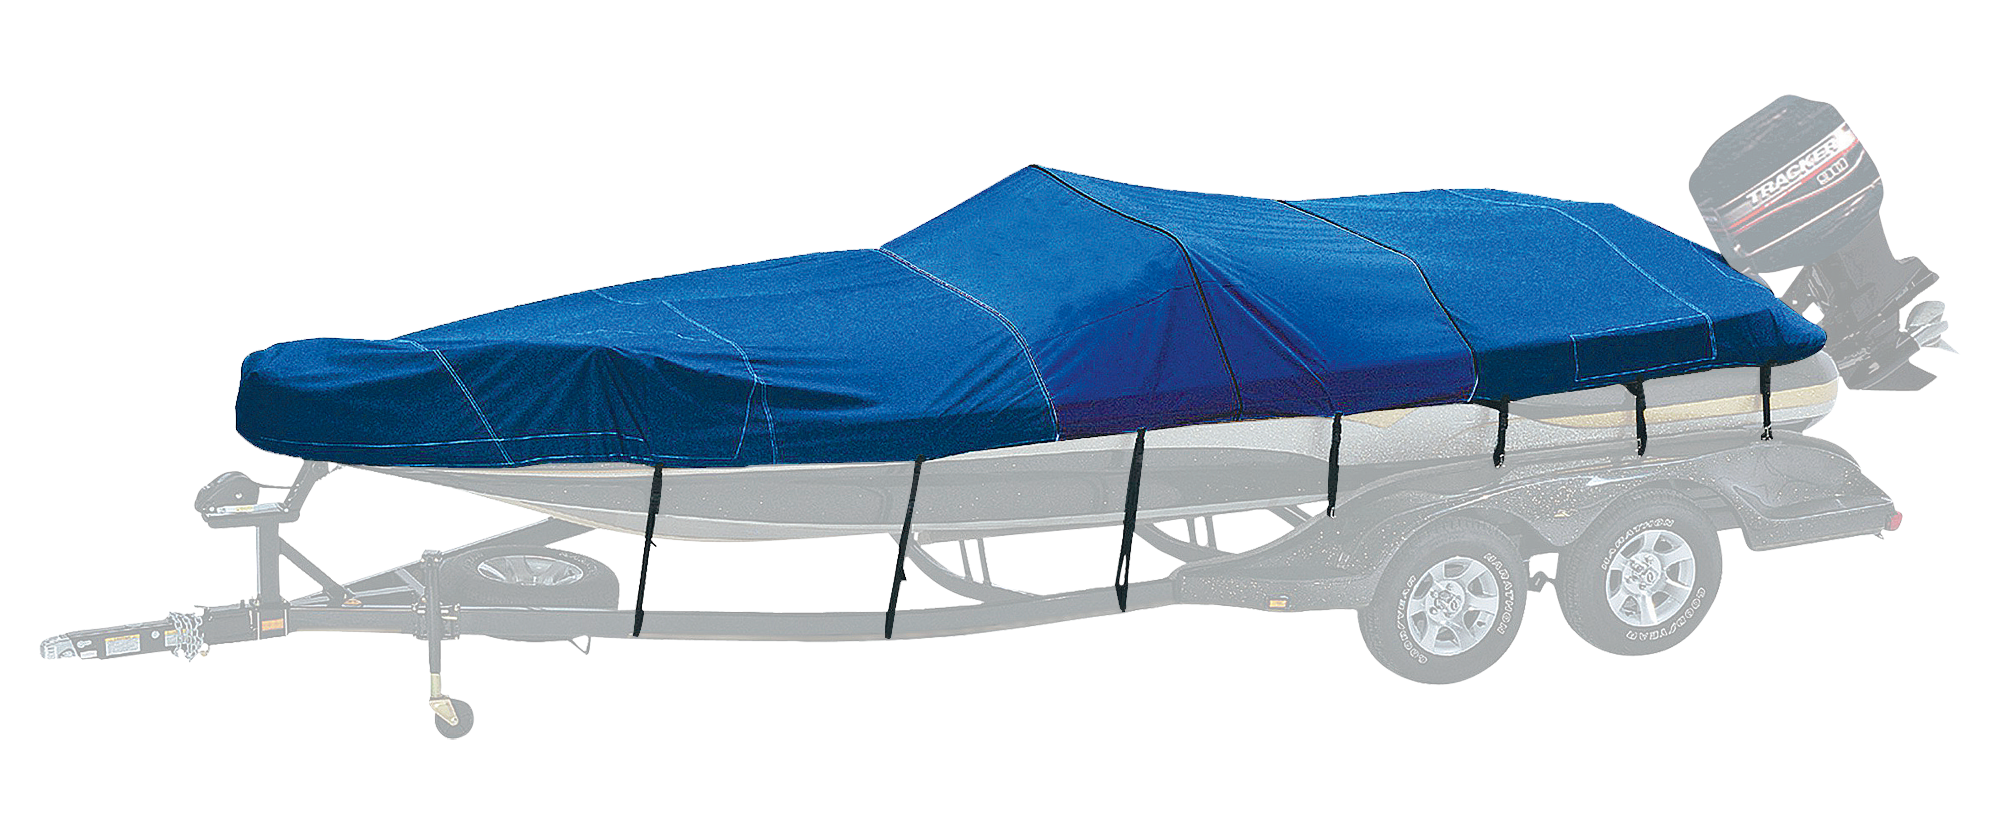 Bass Pro Shops Exact Fit Custom Boat Cover by Westland for TRACKER Tundra Models